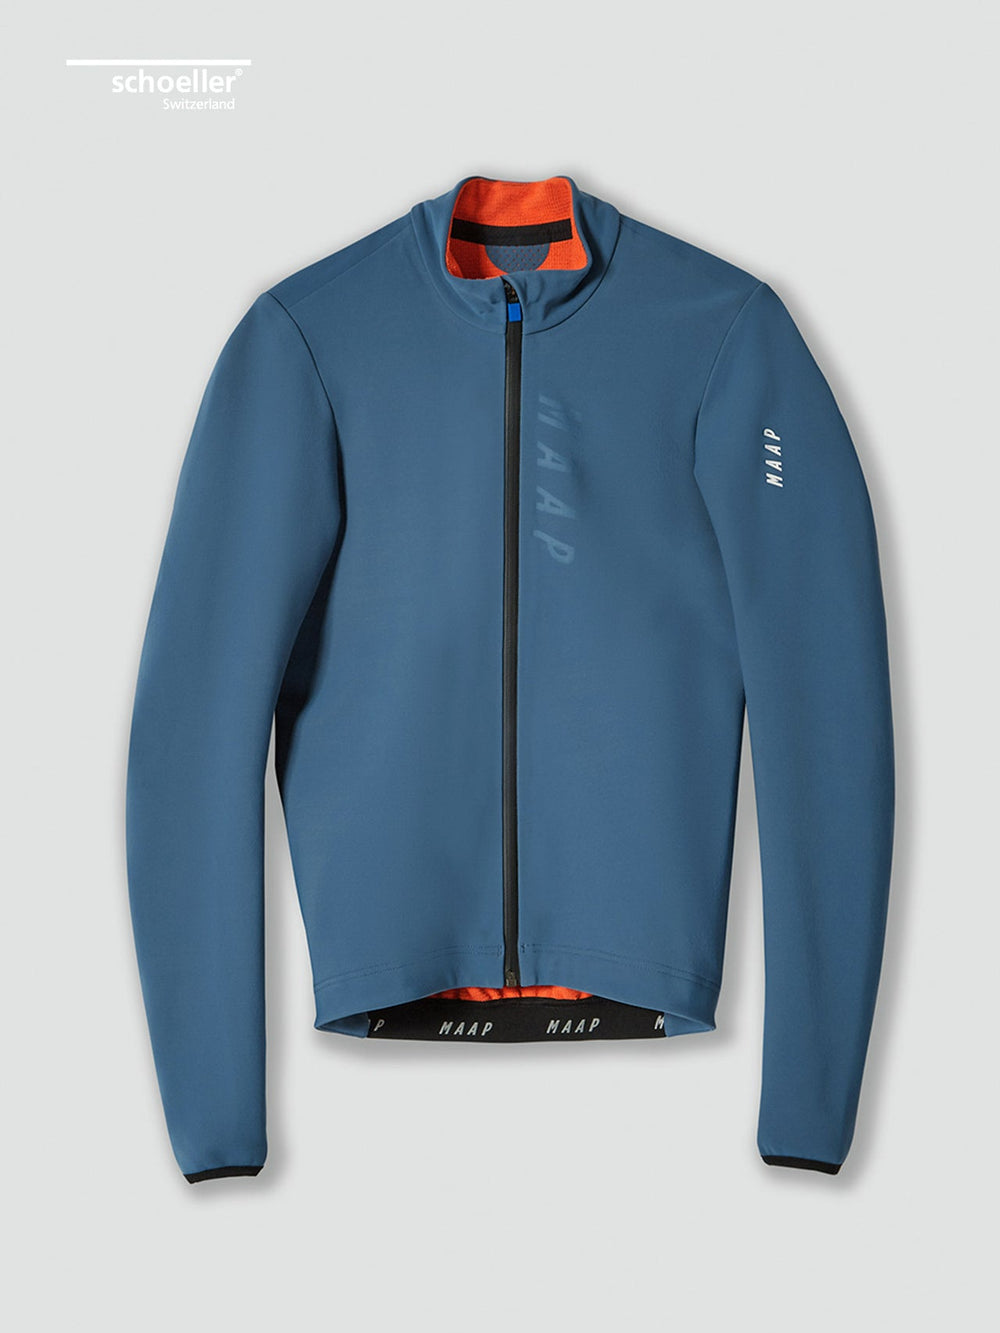 Product Image for Apex Winter Jacket 2.0